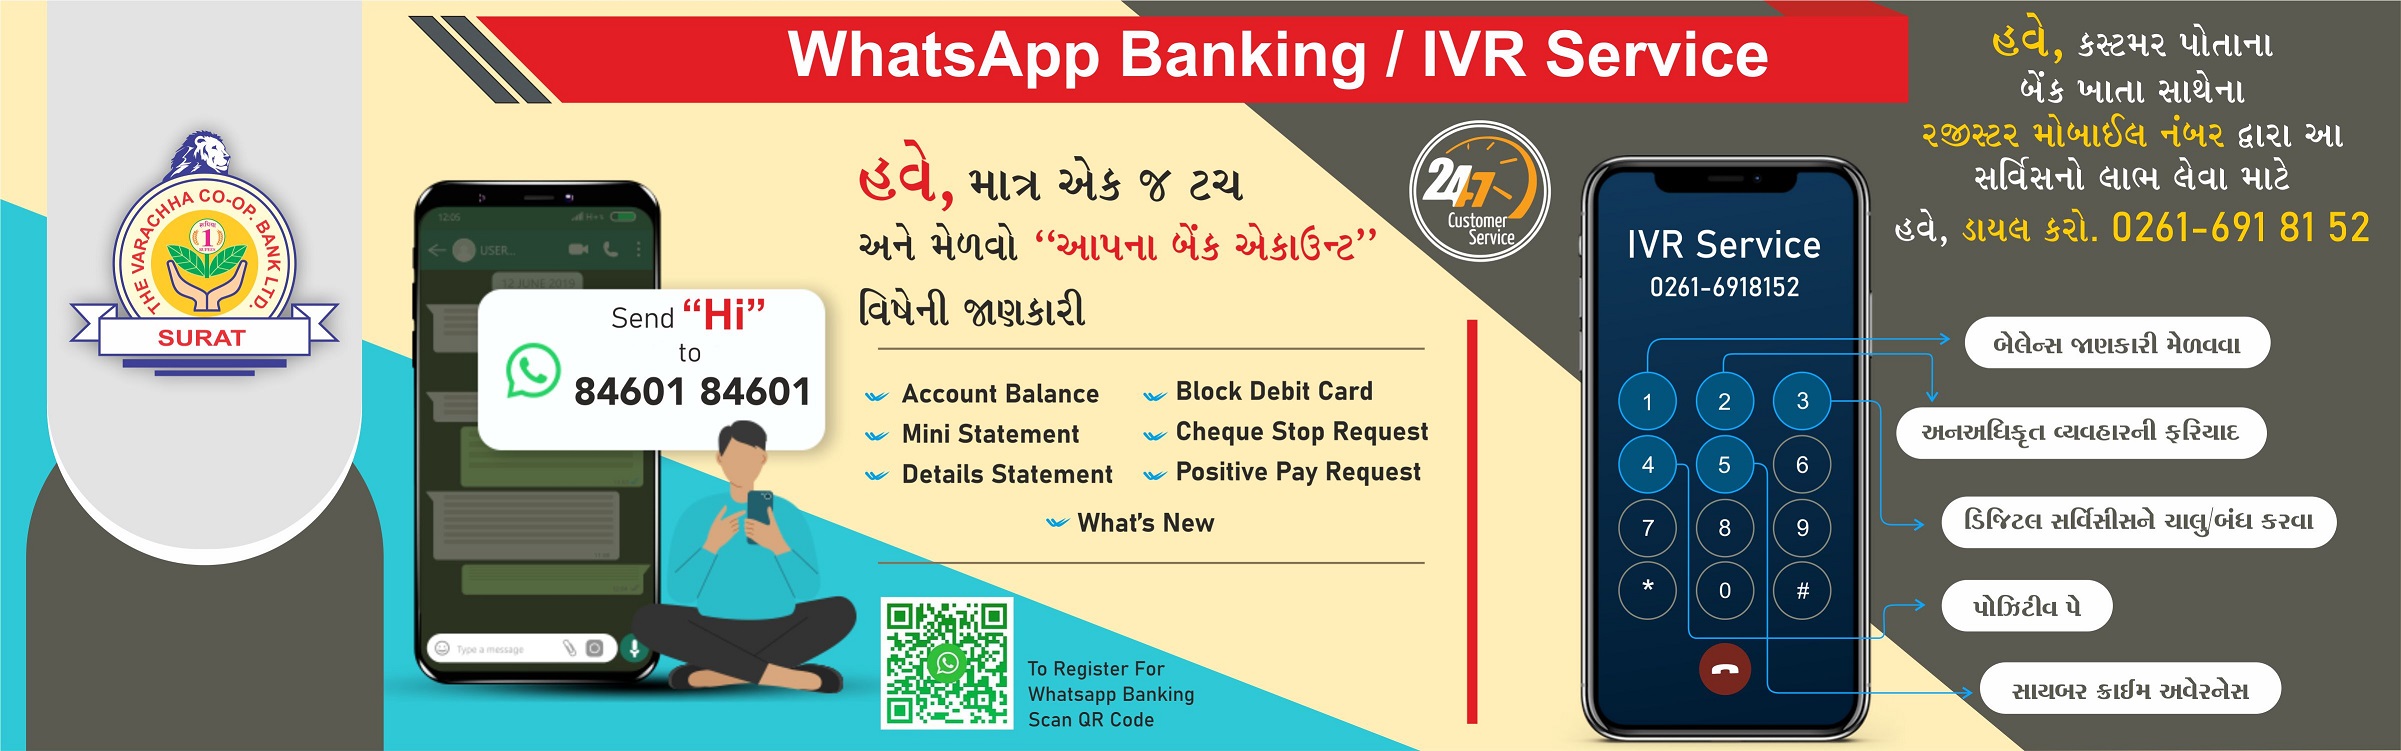 WB AND IVR SERVICE